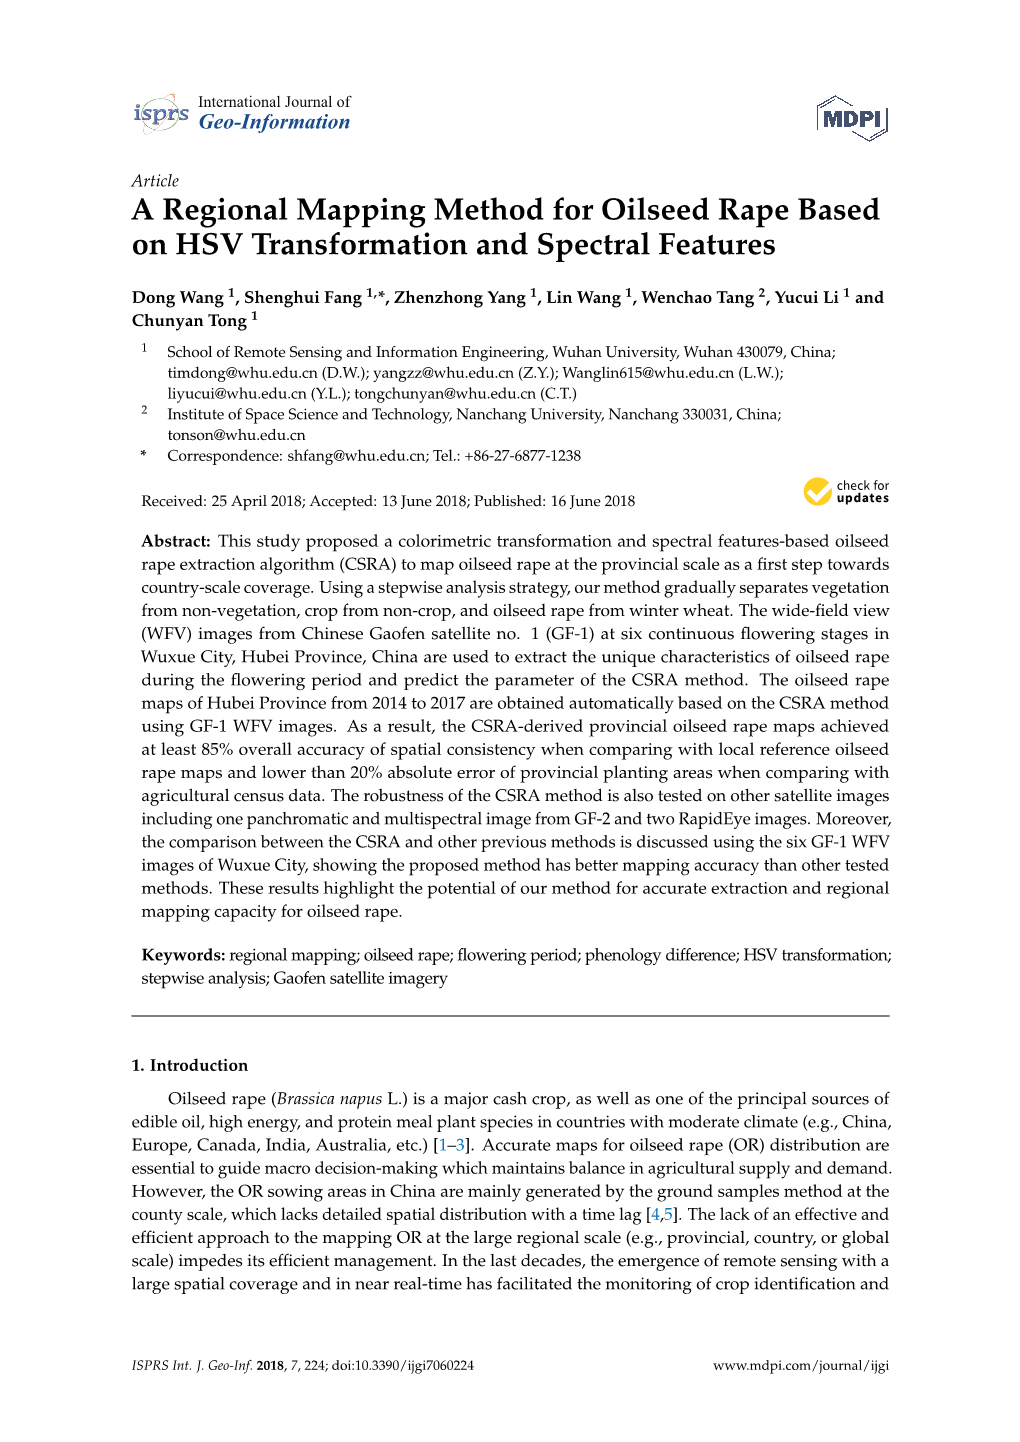 A Regional Mapping Method for Oilseed Rape Based on HSV Transformation and Spectral Features